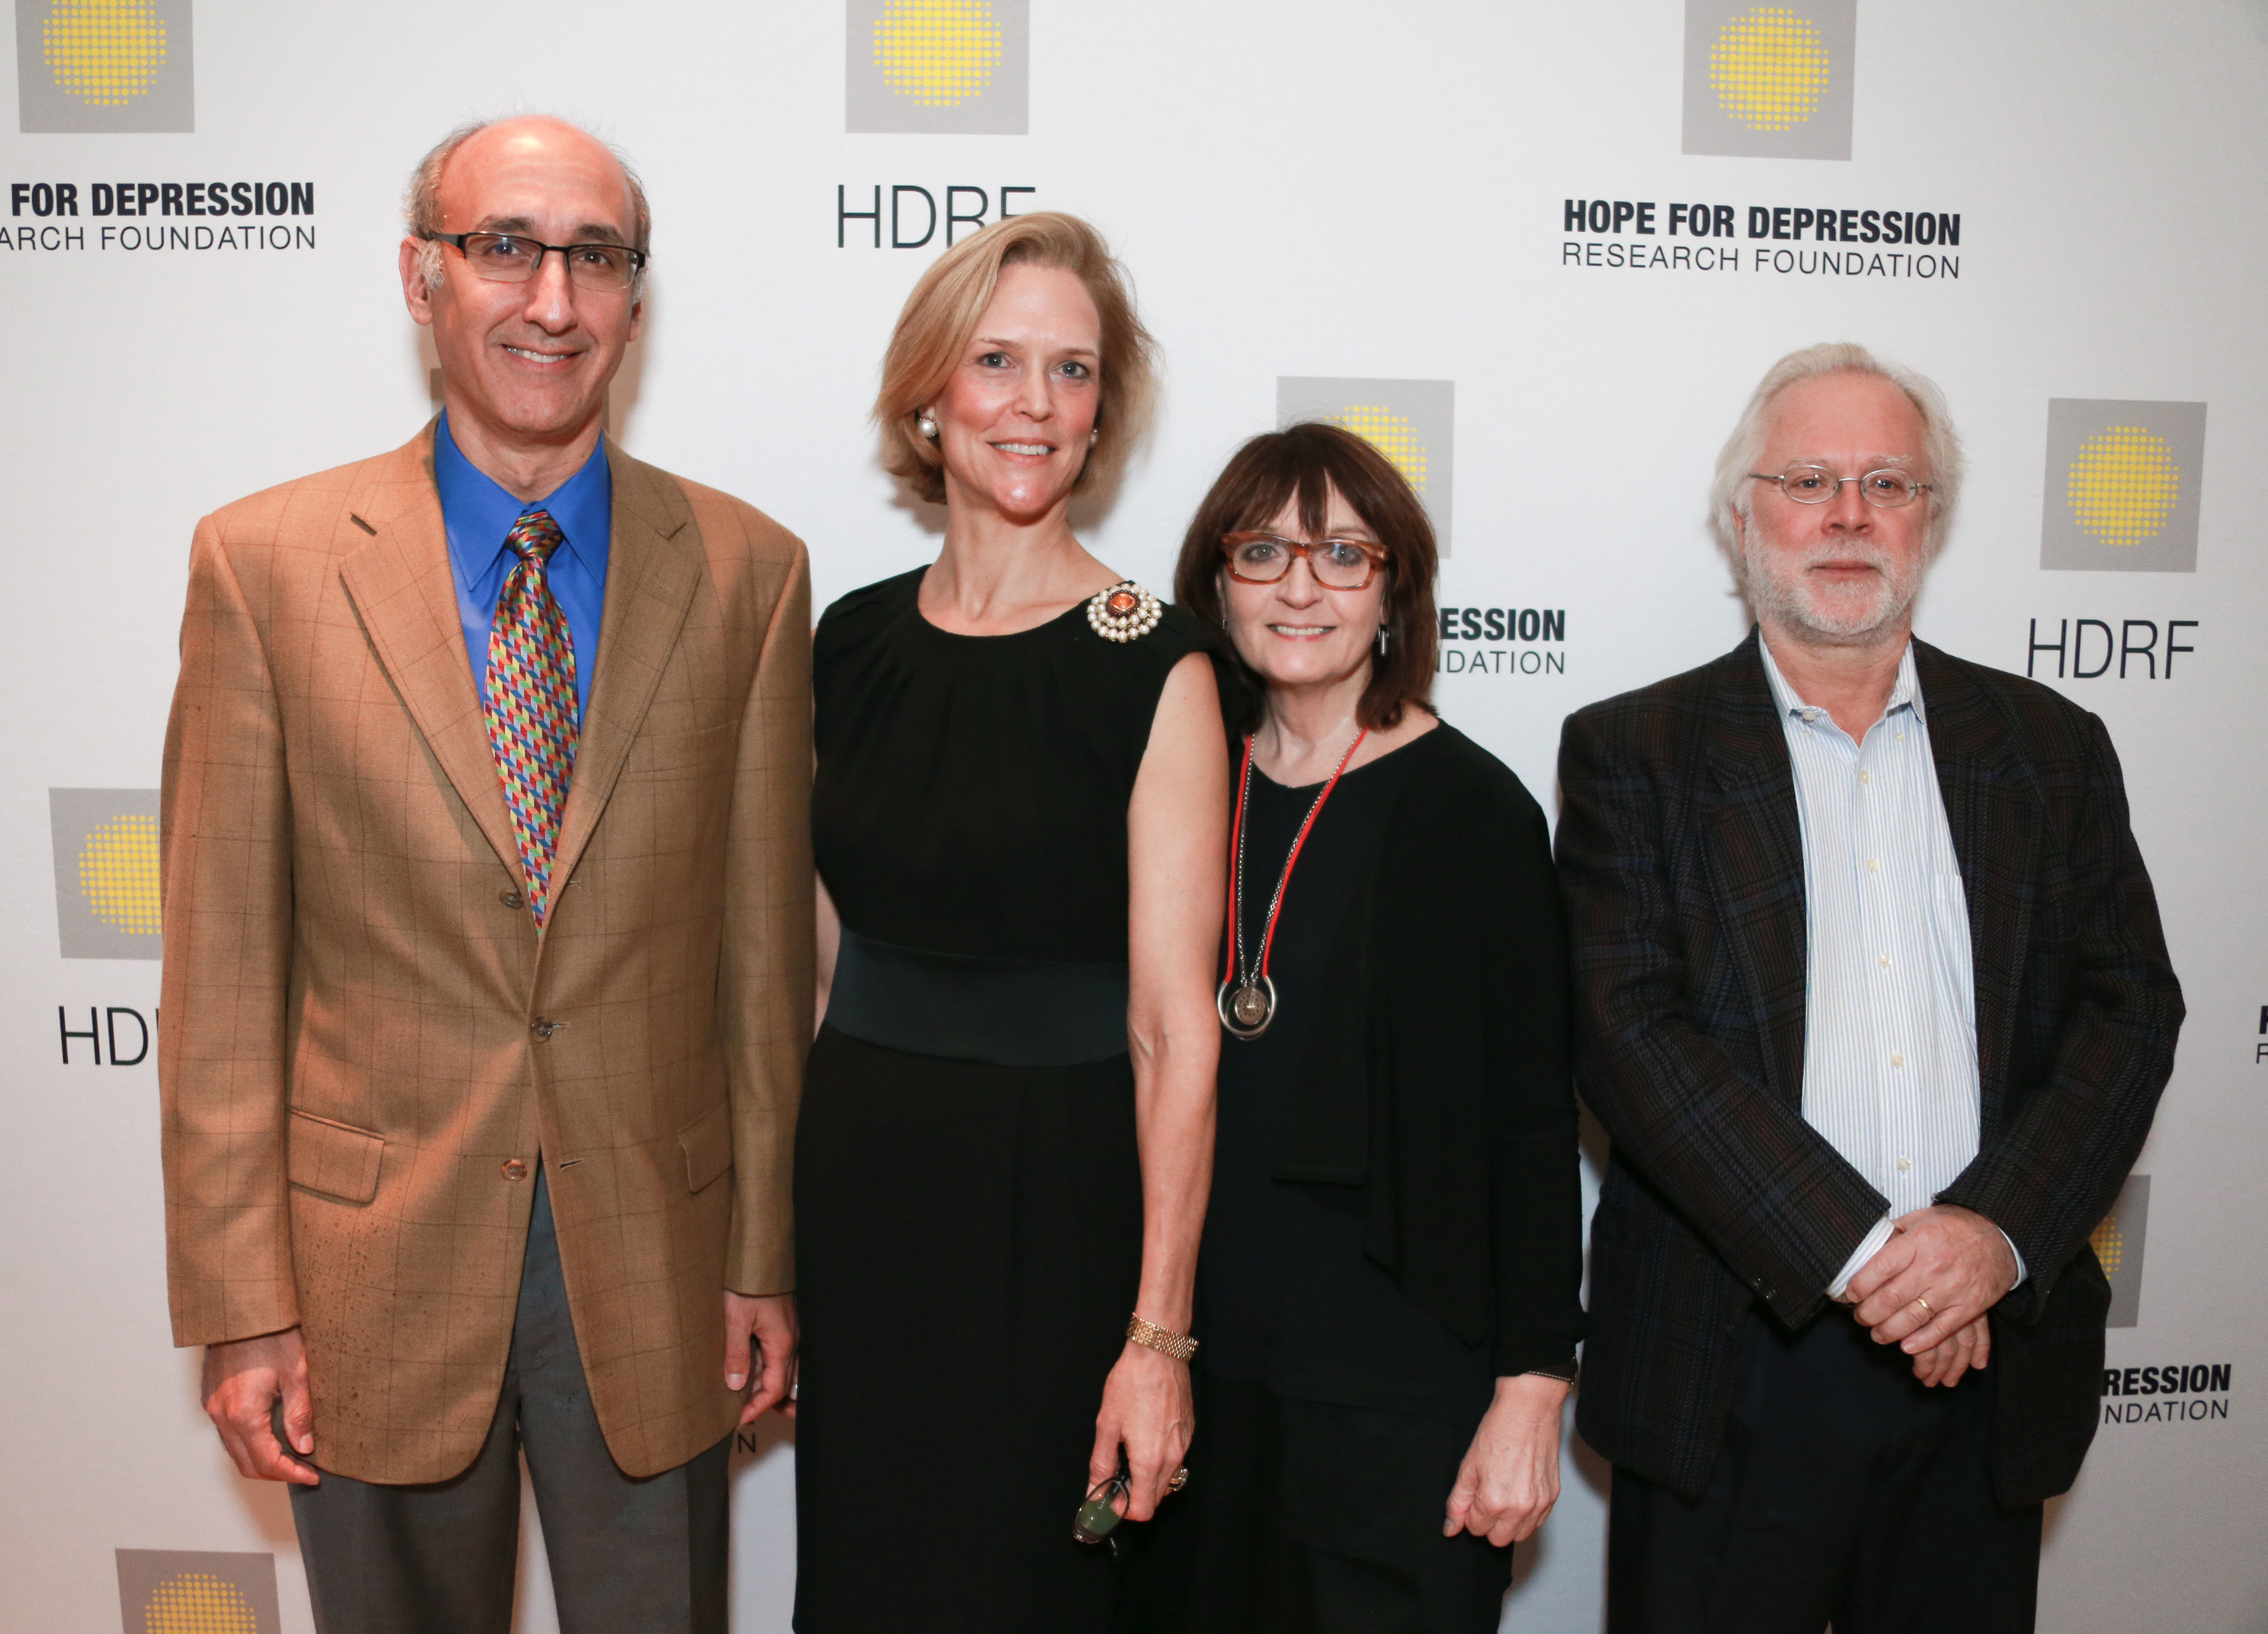 Jonathan Javitch, Louisa Benton, Helen Mayberg, Rene Hen== Hope for Depression Research Foundation 10th Annual Hope Luncheon Seminar== The Plaza Hotel, NYC== November 15, 2016== ©Patrick McMullan== Photo - Victor Hugo/PMC== ==